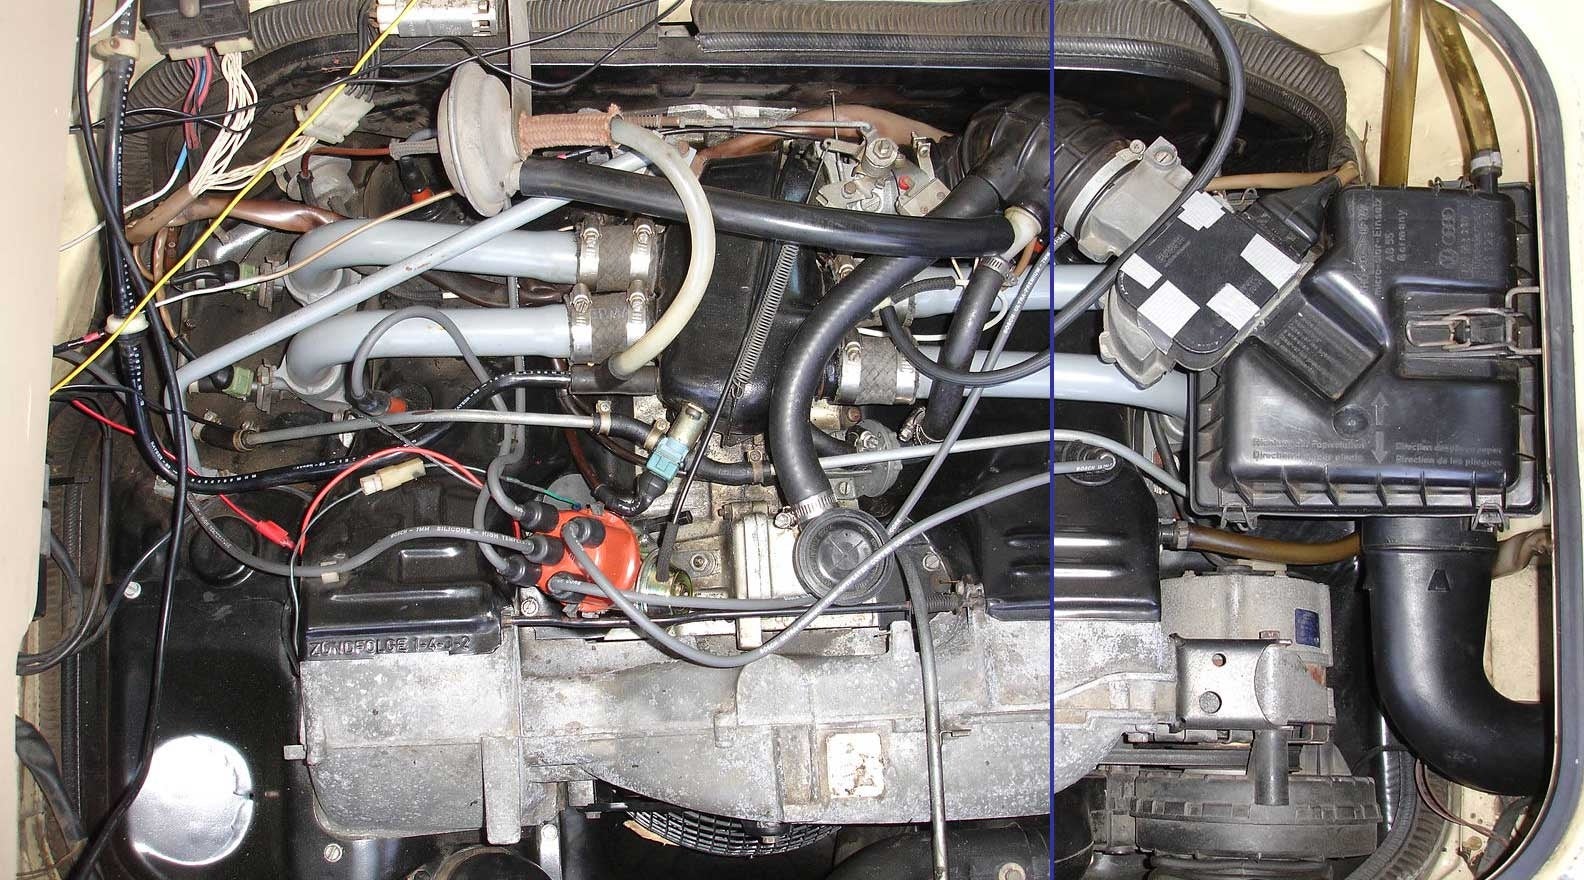 Maintenance & Repair Questions - Choke on a 1980 Vanagon ... 73 vw bug ignition wiring 